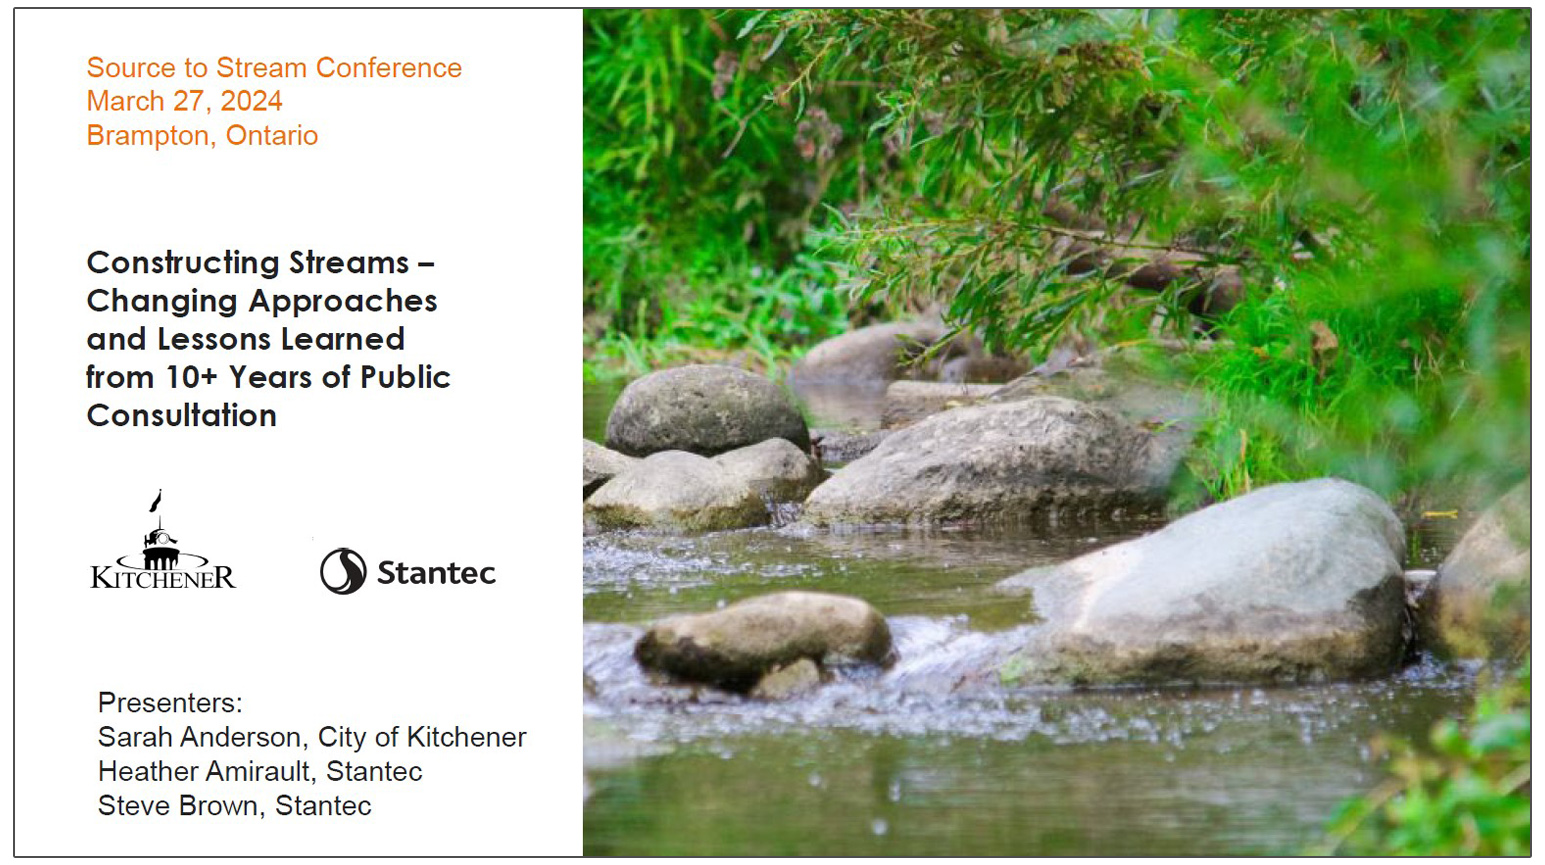 Constructing Streams – Changing Approaches and Lessons Learned from 10+ Years of Public Consultation - presentation by Heather Amirault and Steve Brown and Sarah Anderson